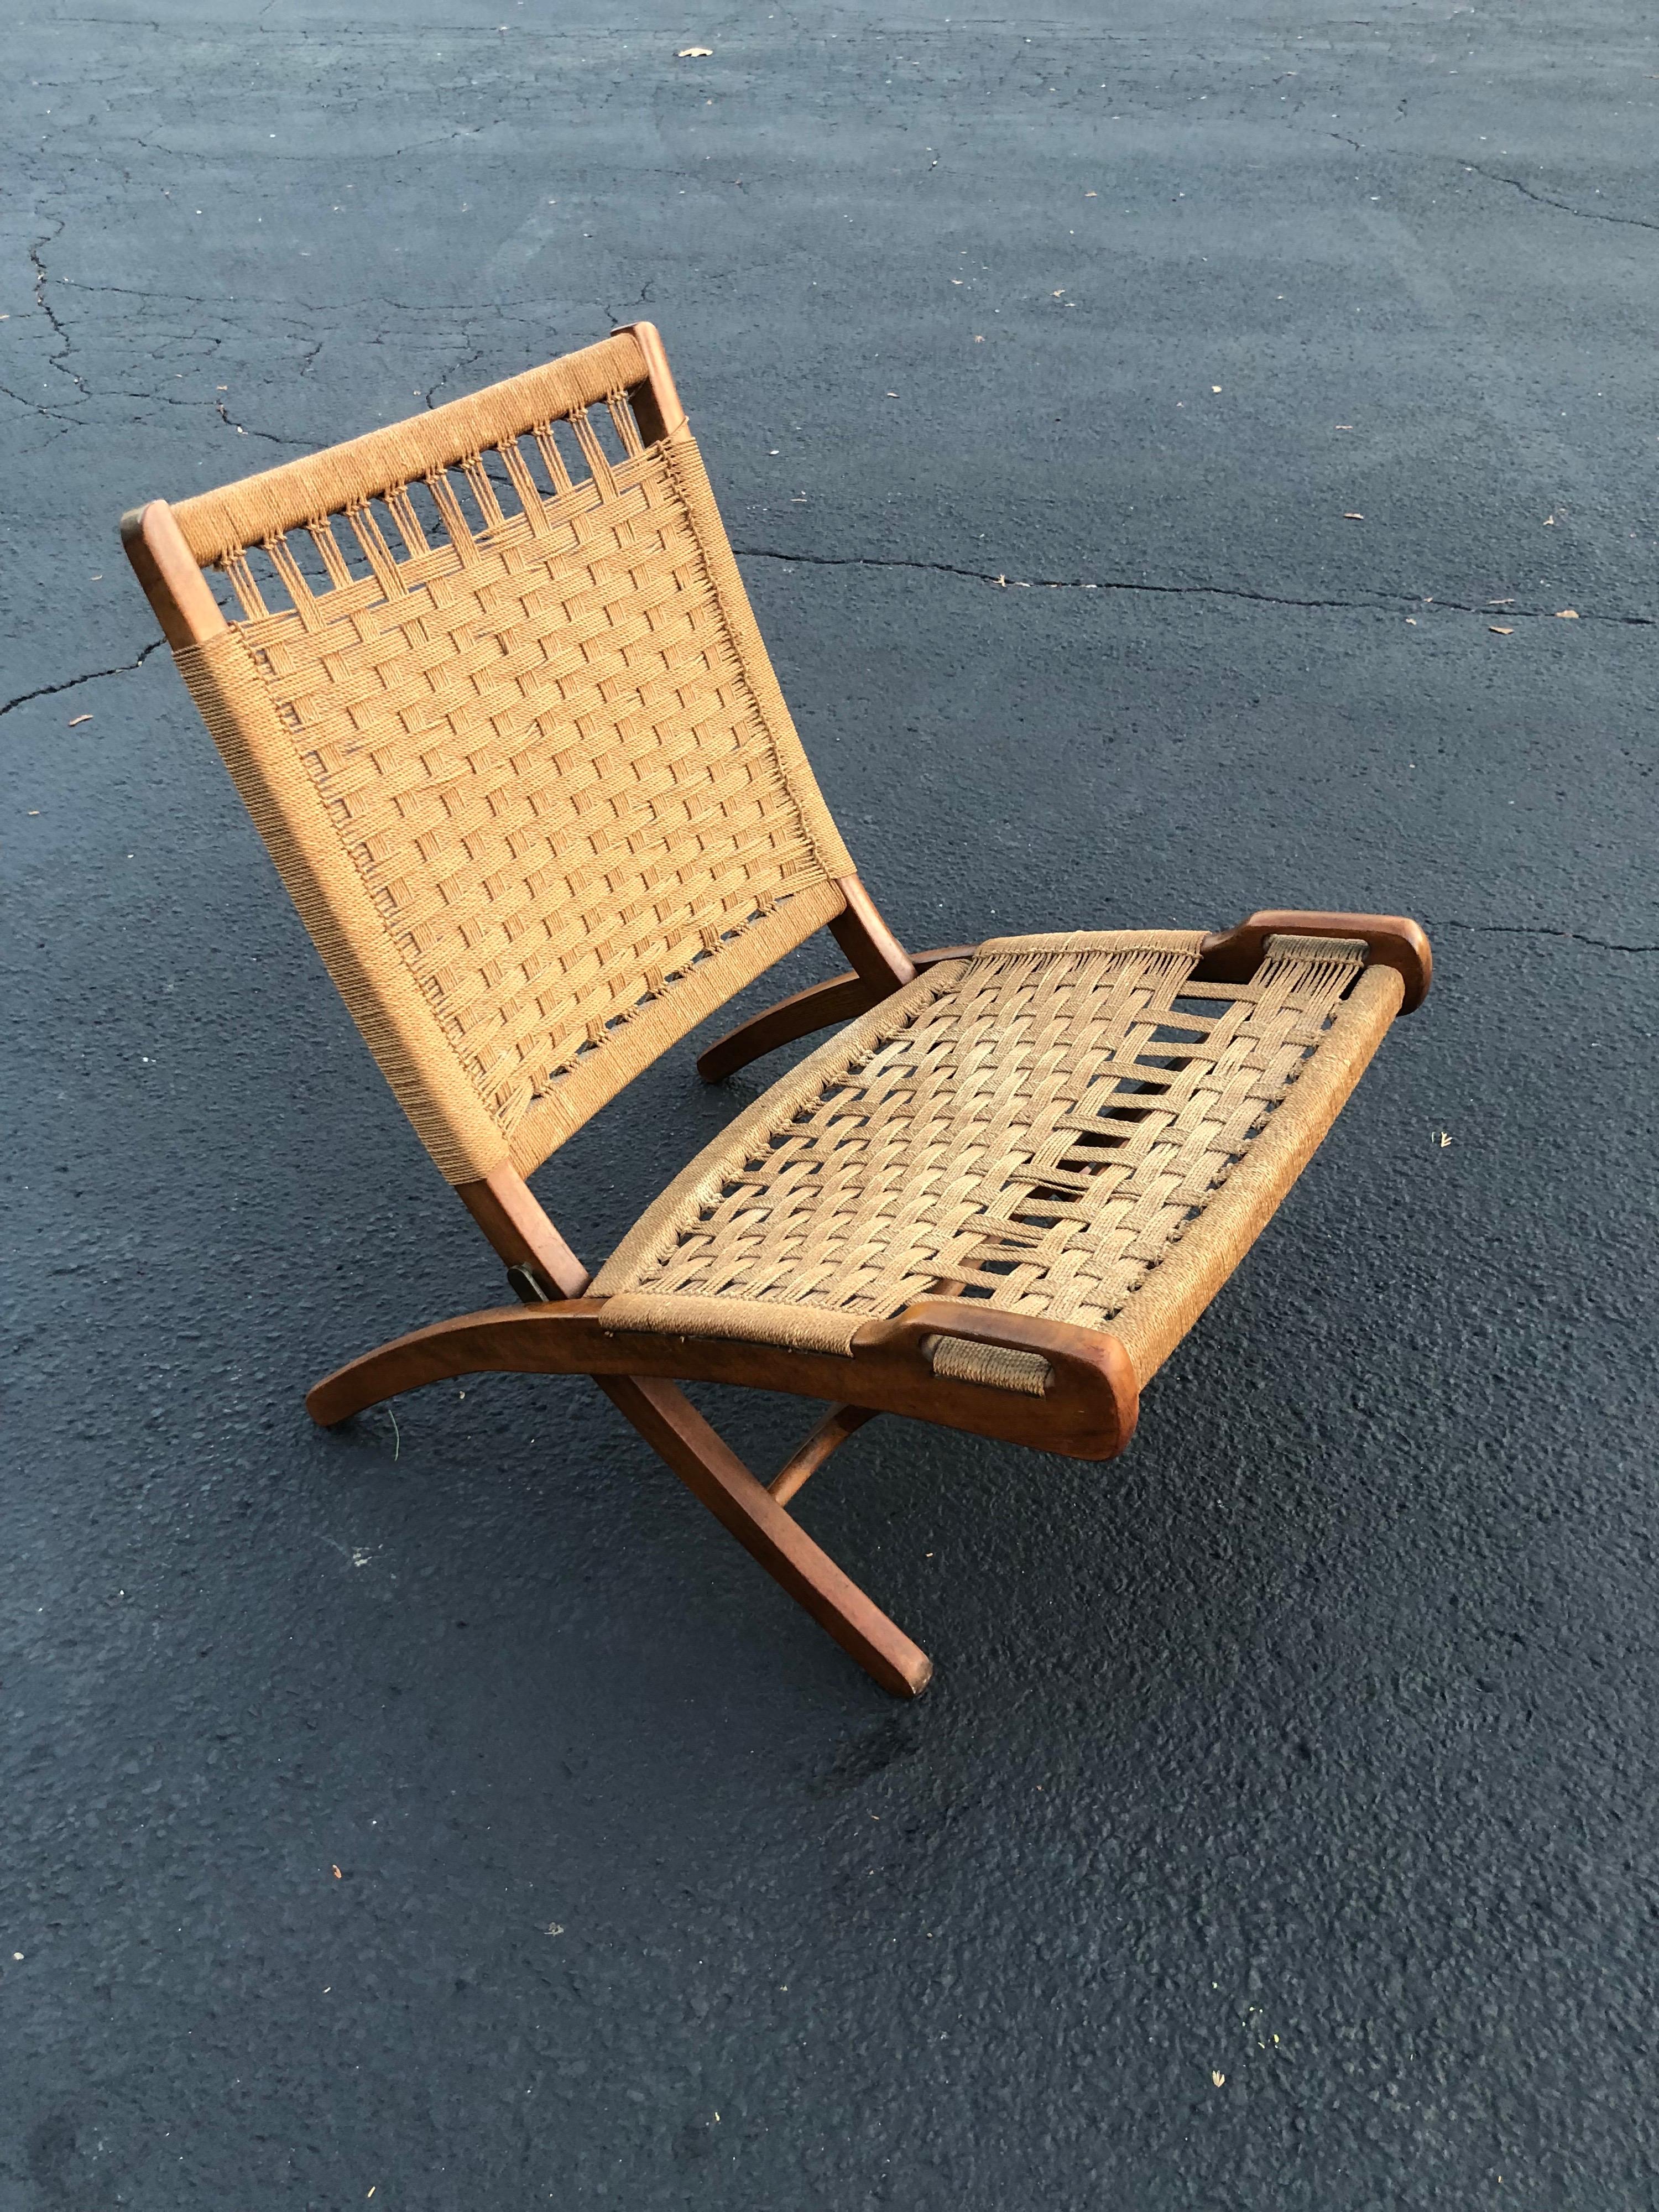 Hans Wegner style folding rope chair. Original 1960's vintage chair in great condition. Original rope weaving design. Solid wooden frame construction. This item is not a reproduction but an original 1960's chair. This item can parcel ship very